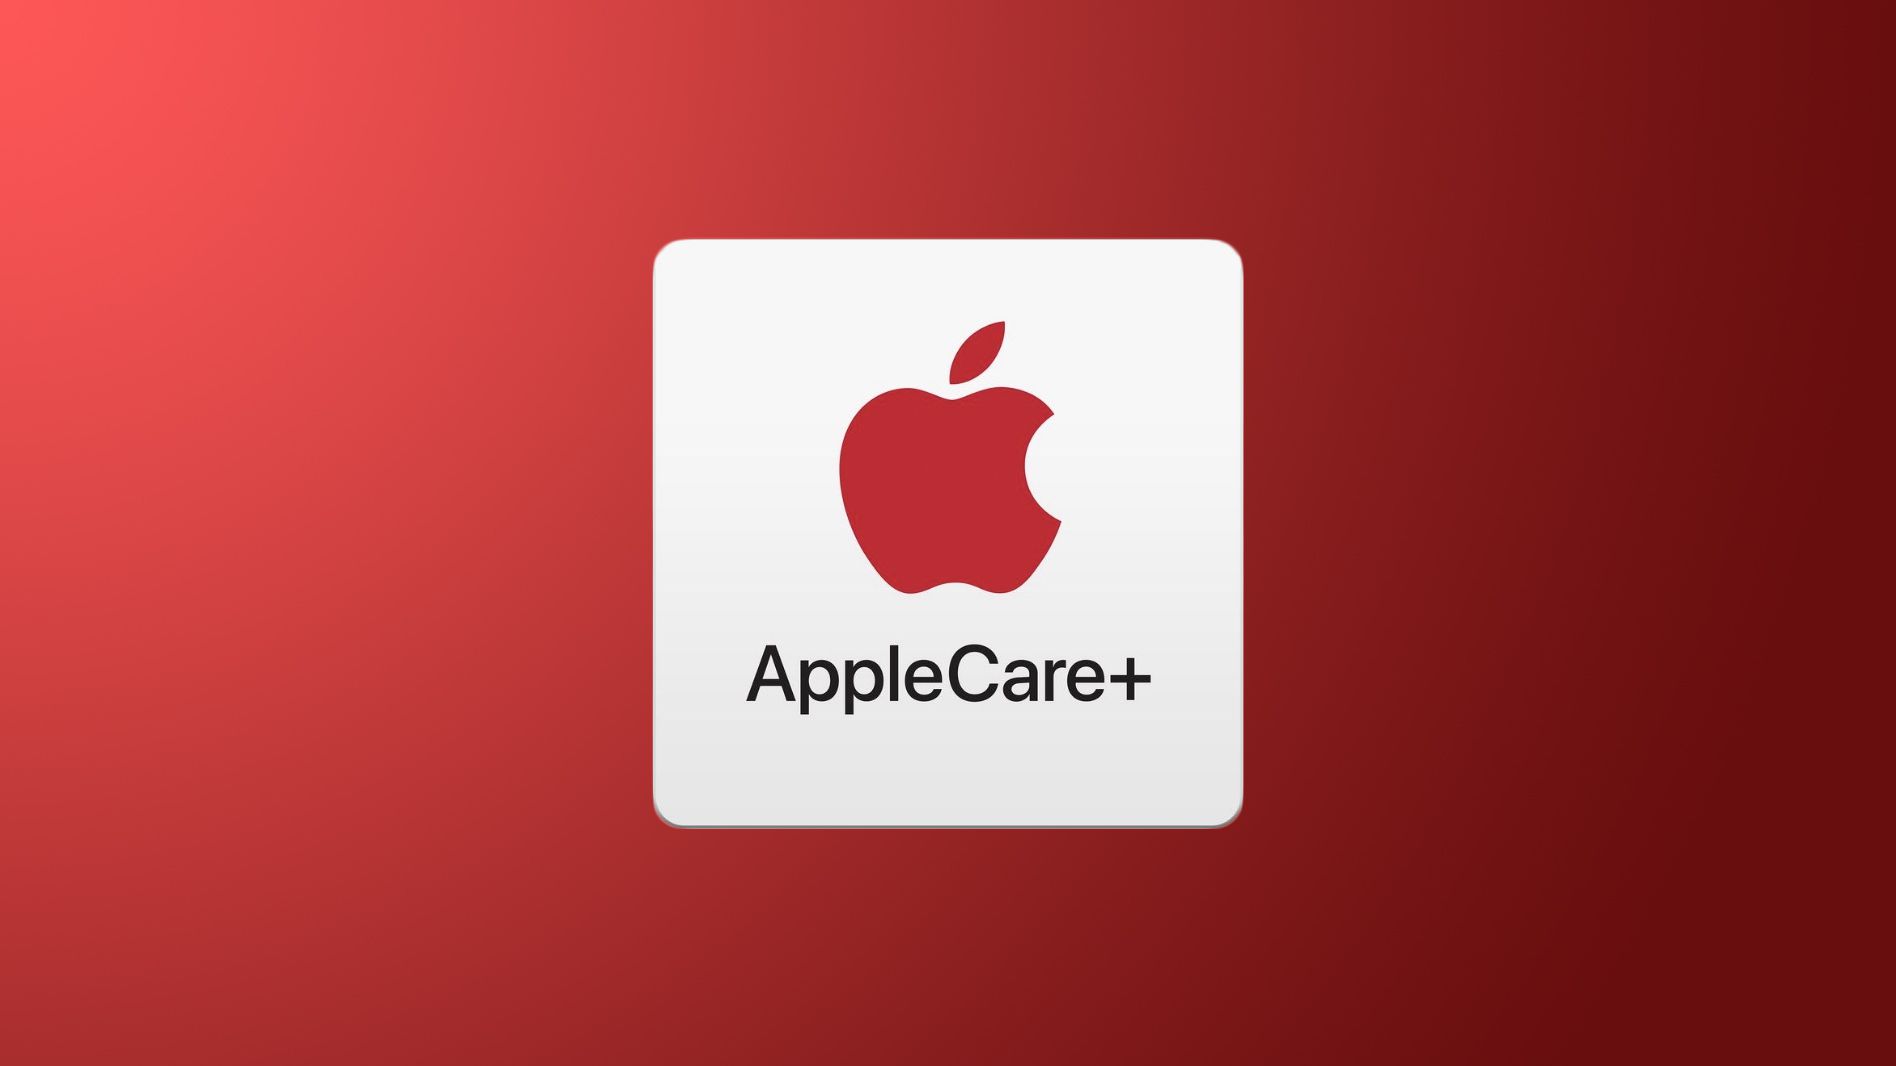 can i purchase applecare after ip urchae my mac